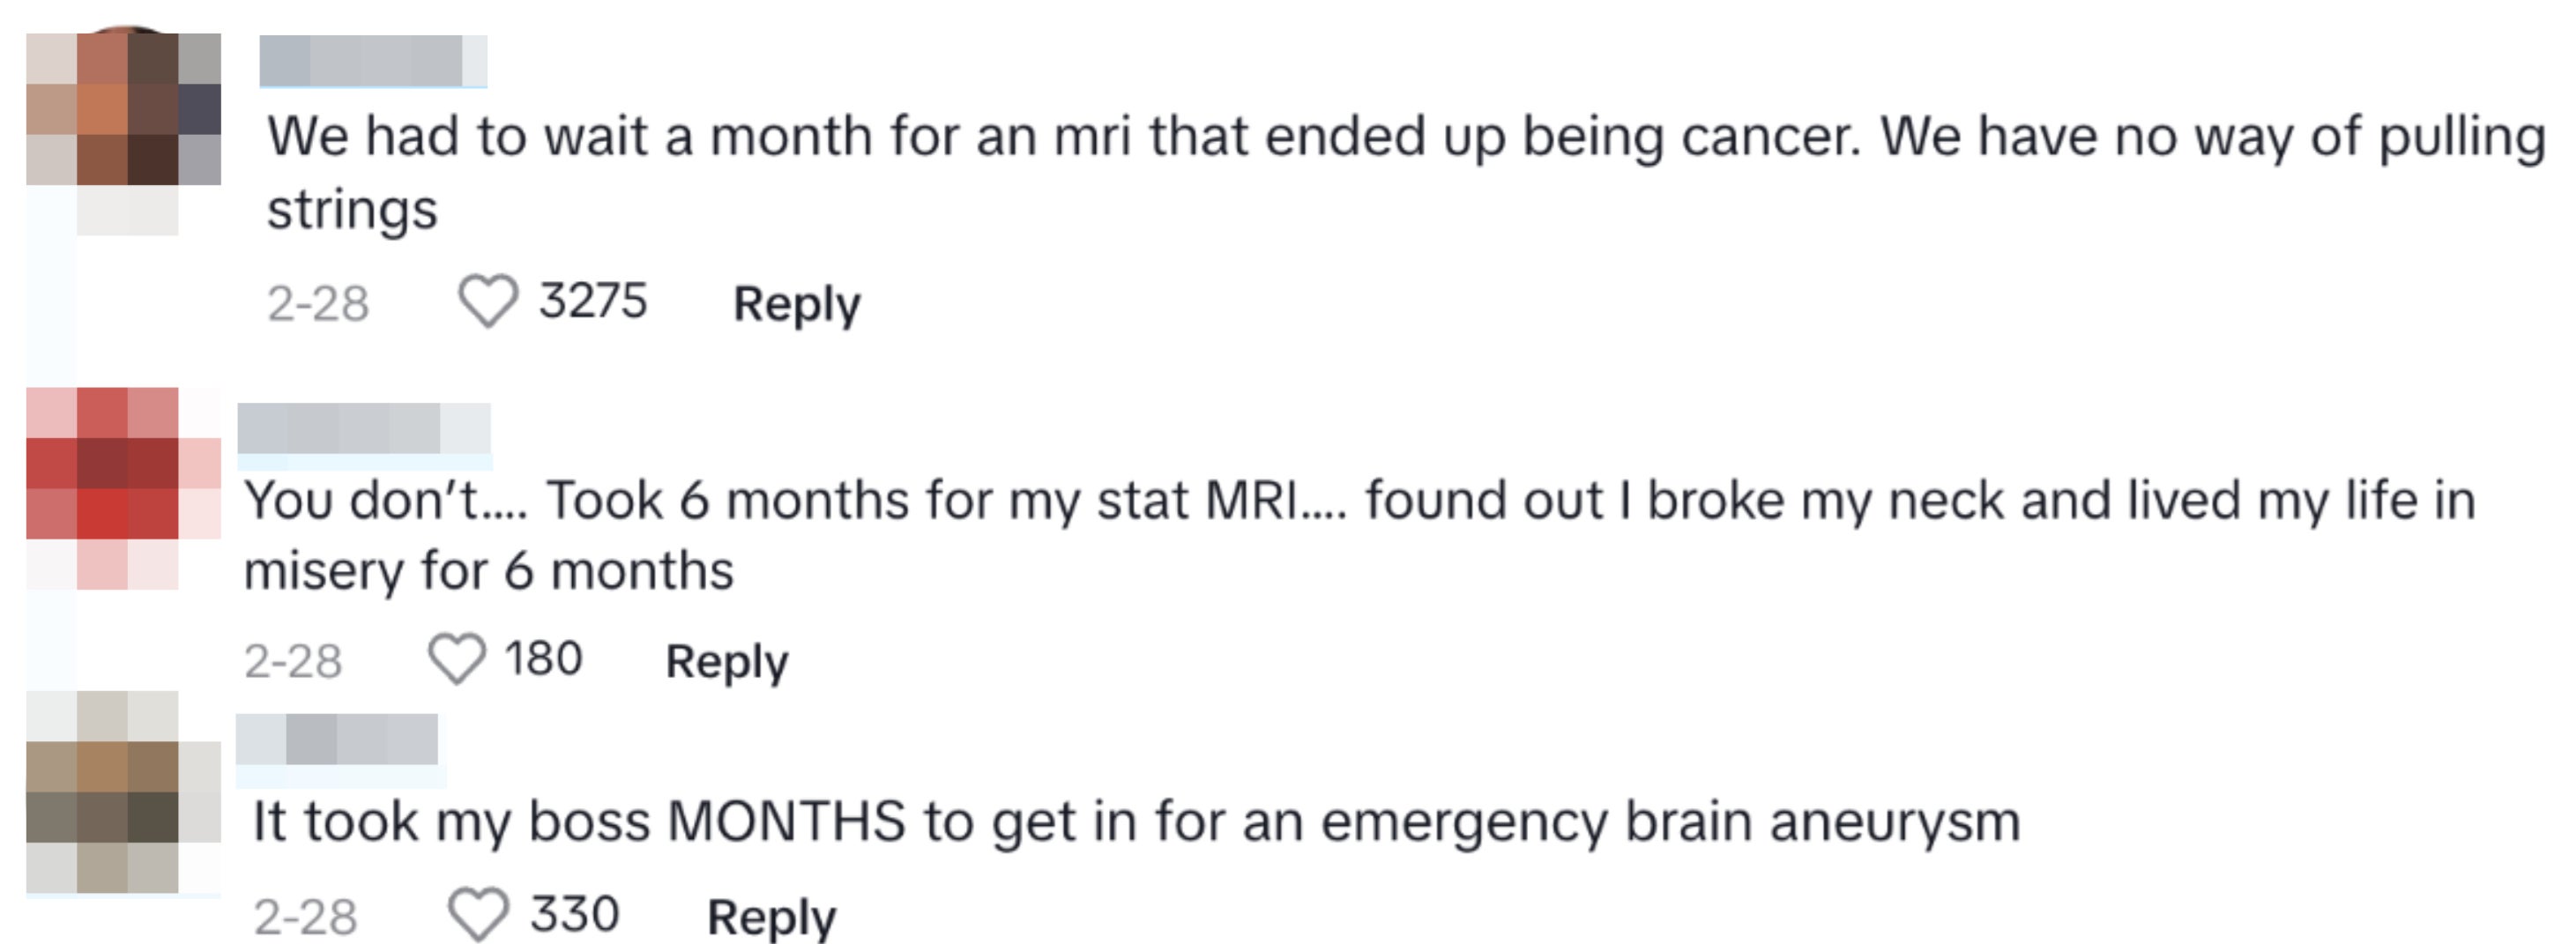 Three social media comments discussing long waits for MRI scans and their health consequences